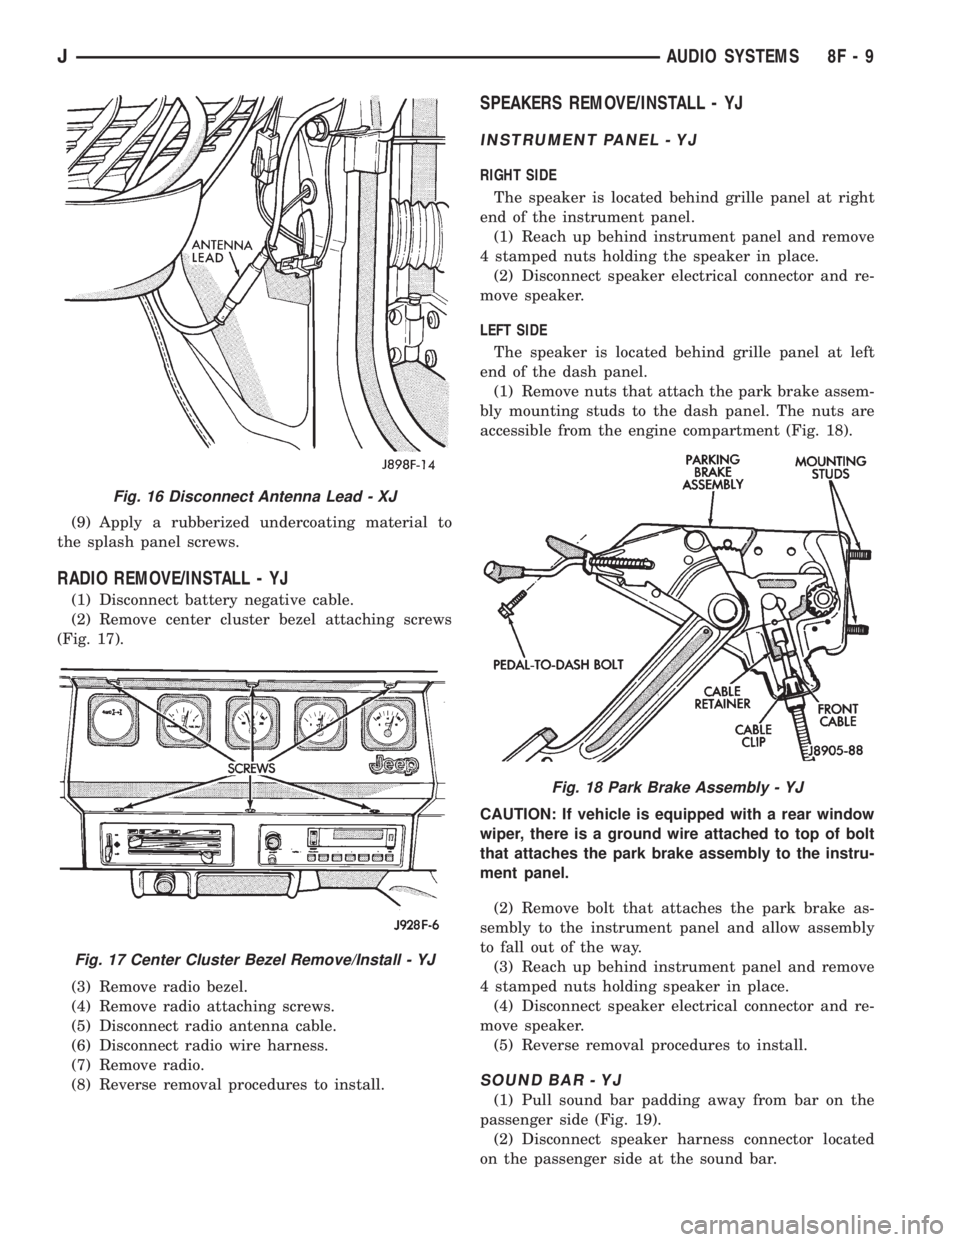 JEEP XJ 1995  Service And Repair Manual (9) Apply a rubberized undercoating material to
the splash panel screws.
RADIO REMOVE/INSTALL - YJ
(1) Disconnect battery negative cable.
(2) Remove center cluster bezel attaching screws
(Fig. 17).
(3